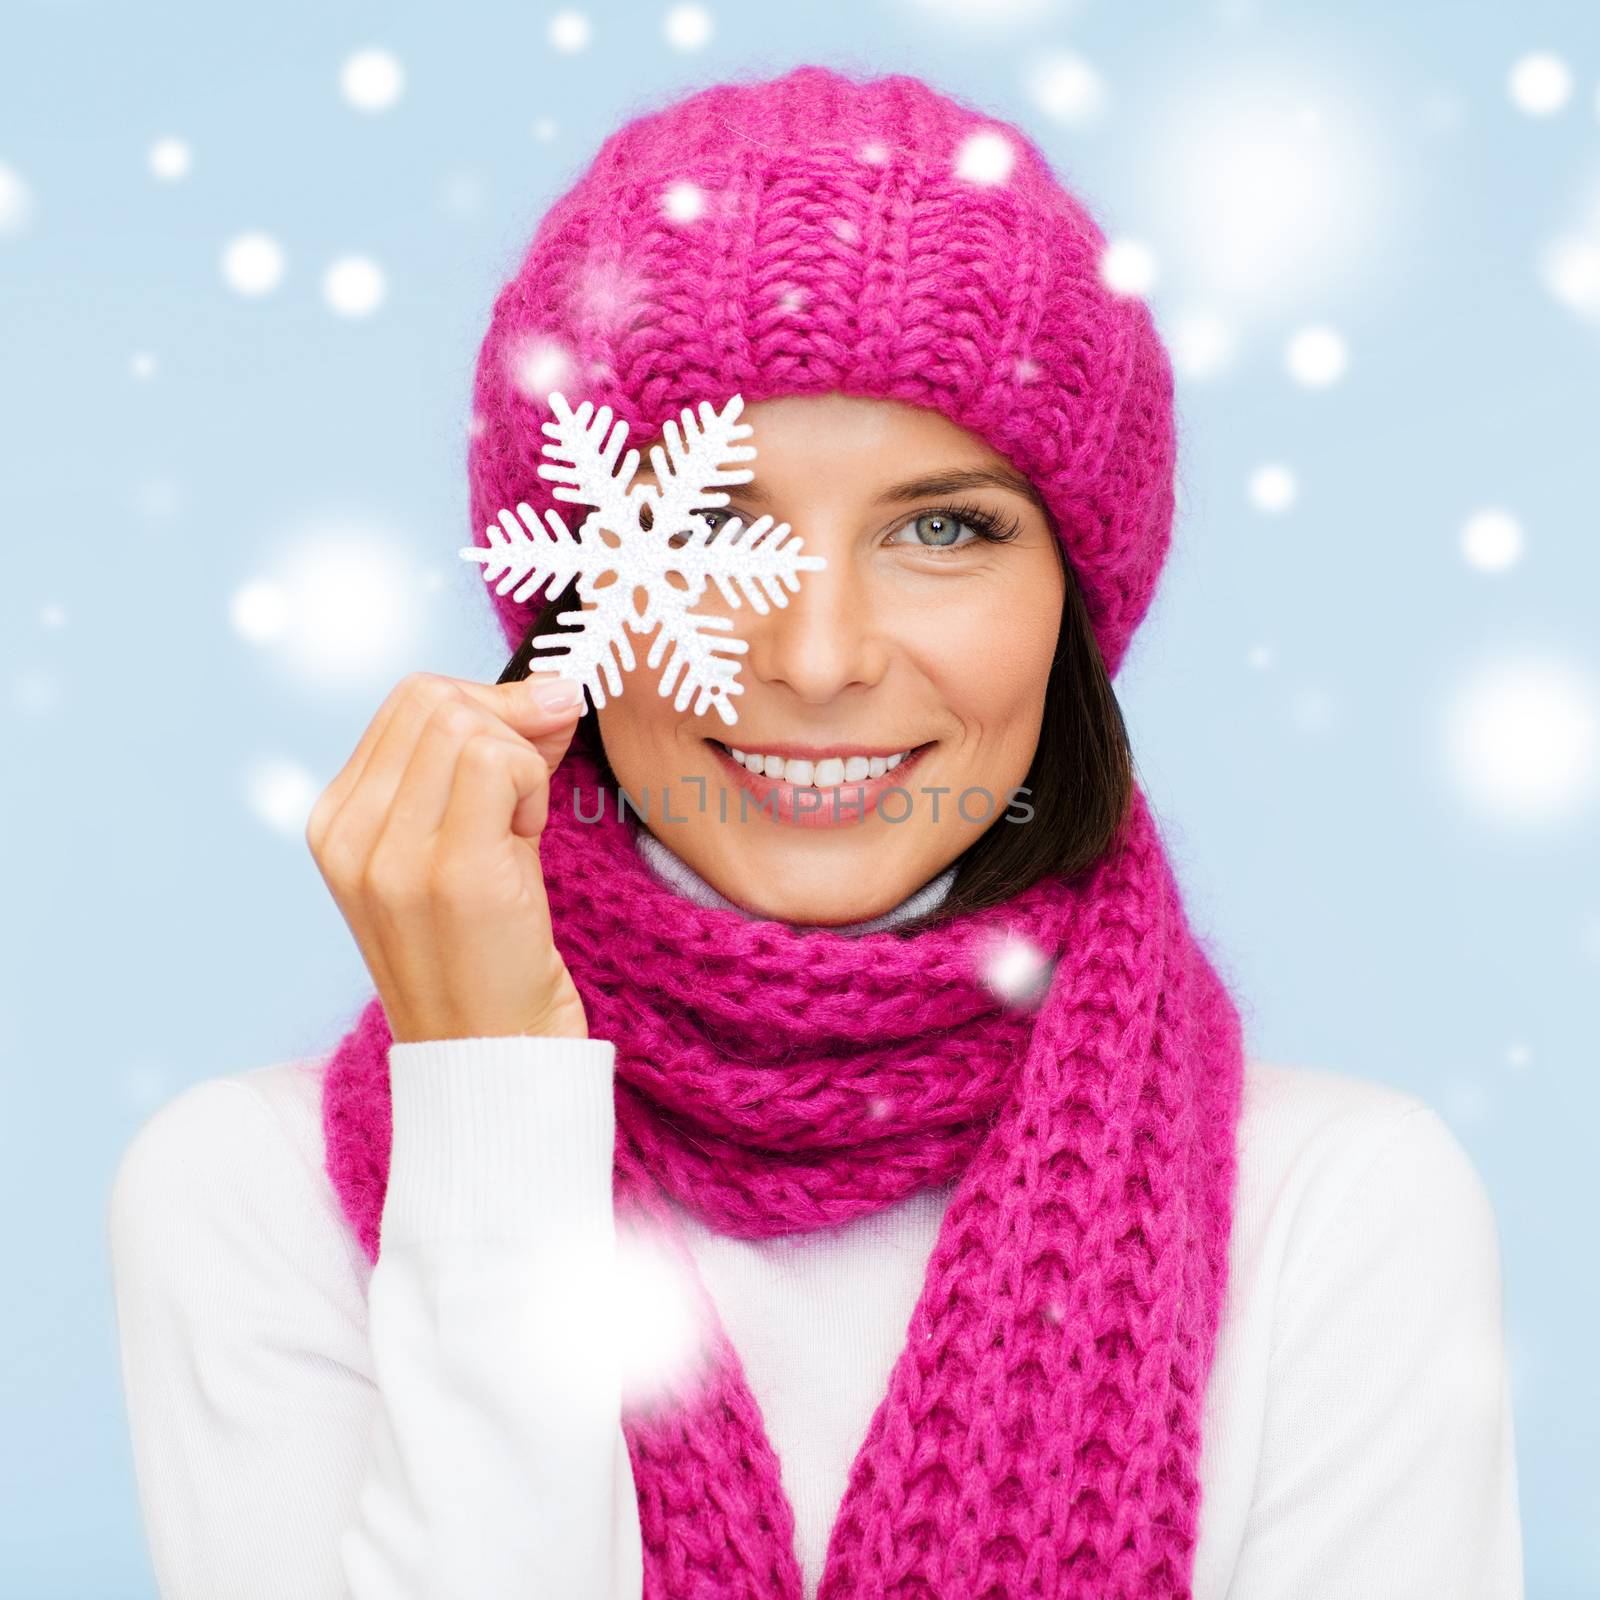 woman in hat and muffler with big snowflake by dolgachov